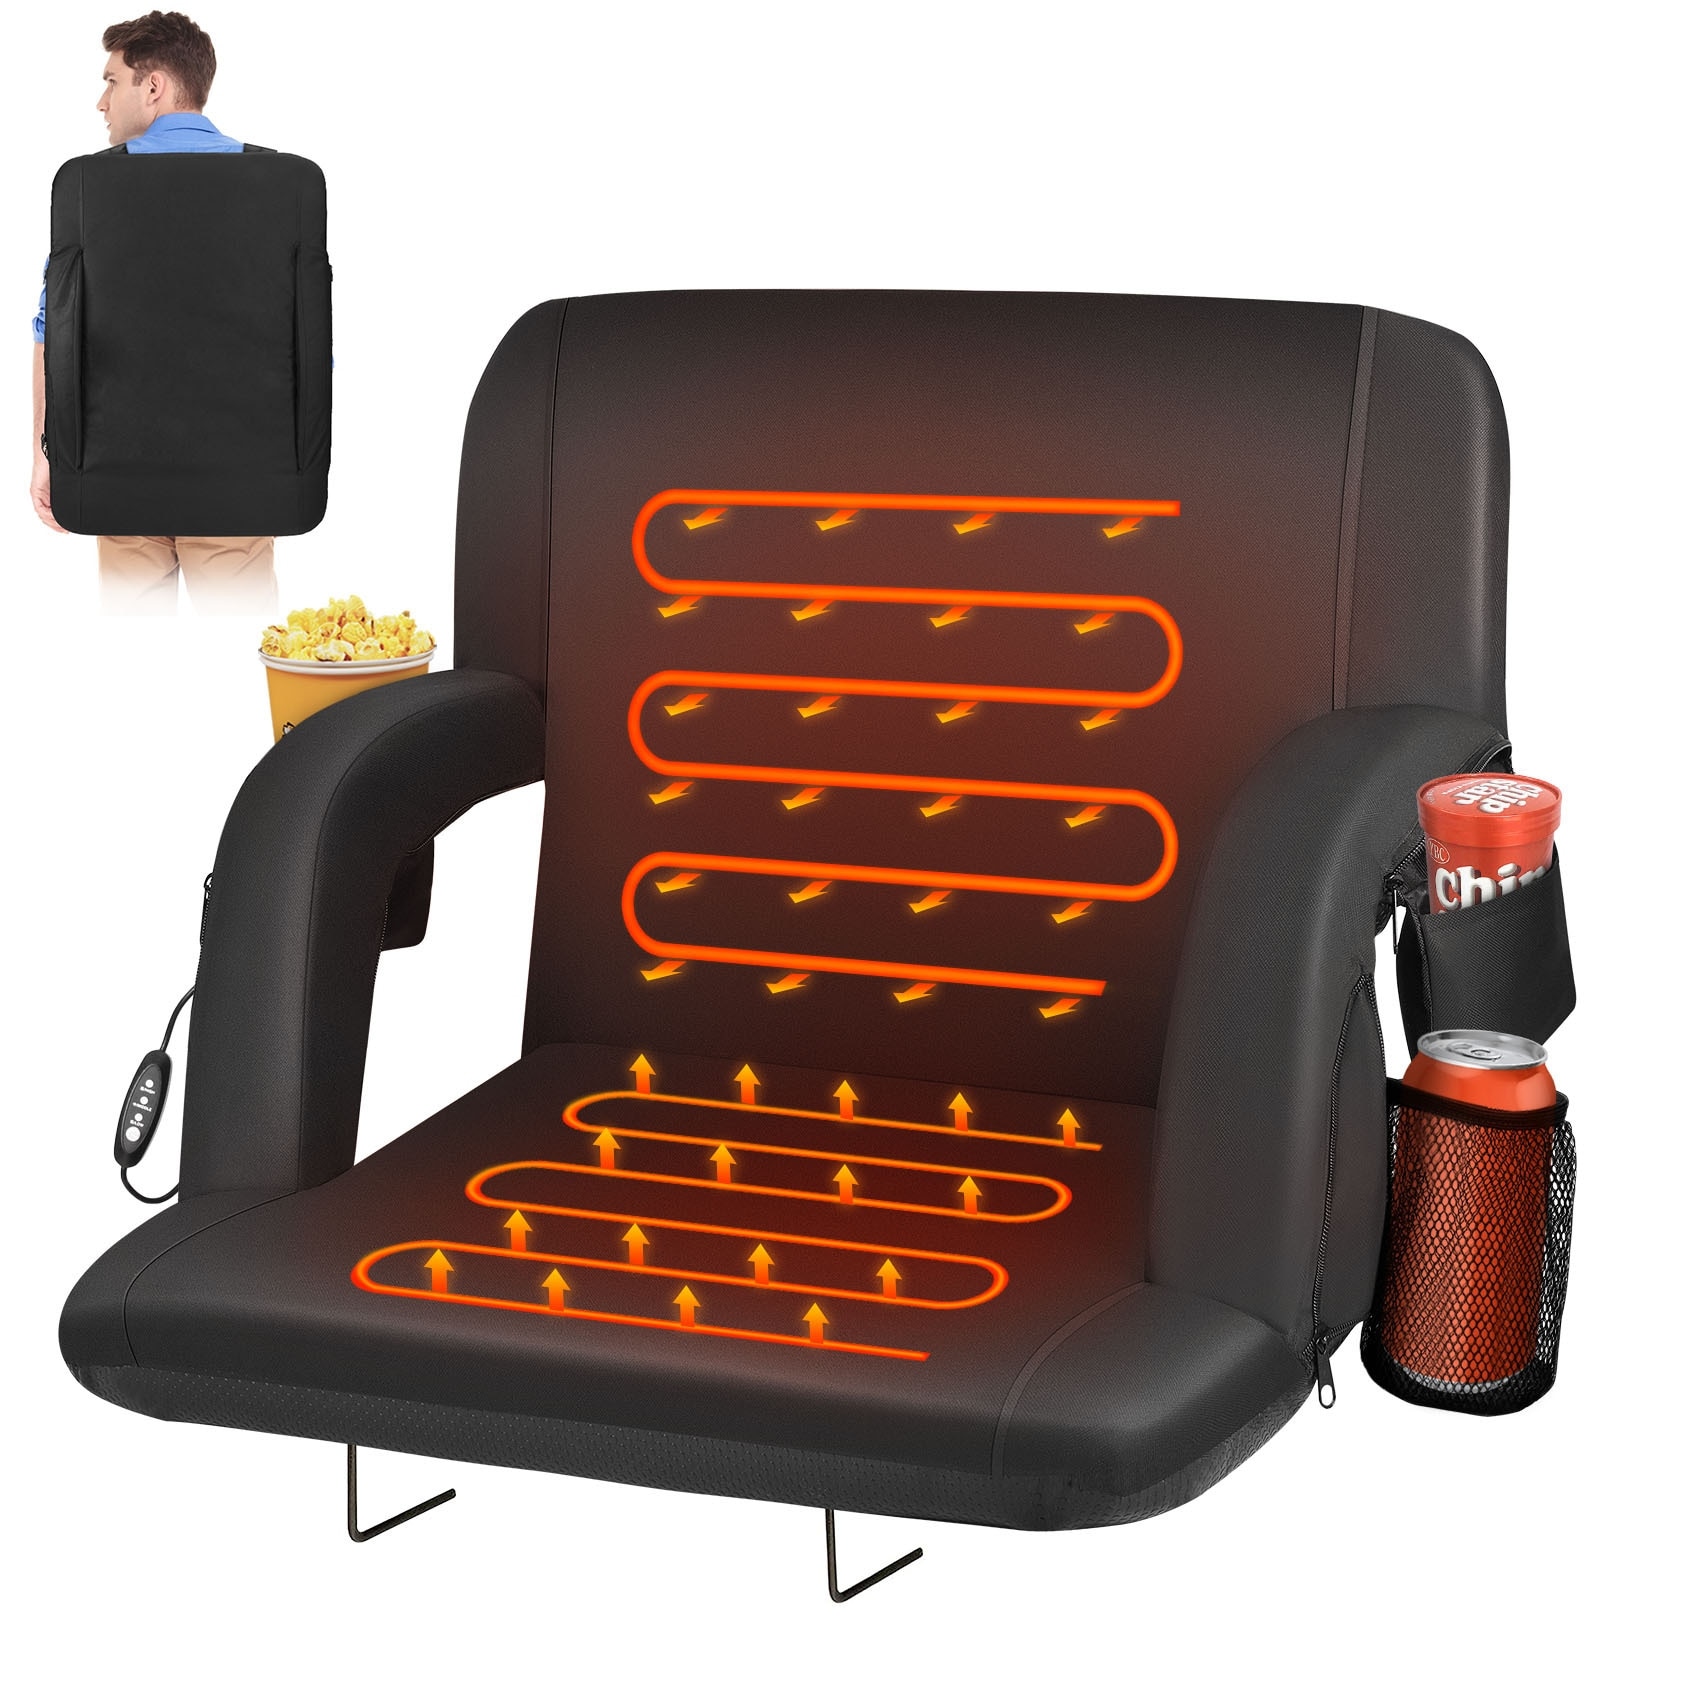 Heated Stadium Seats for Bleachers with Back Support and Wide